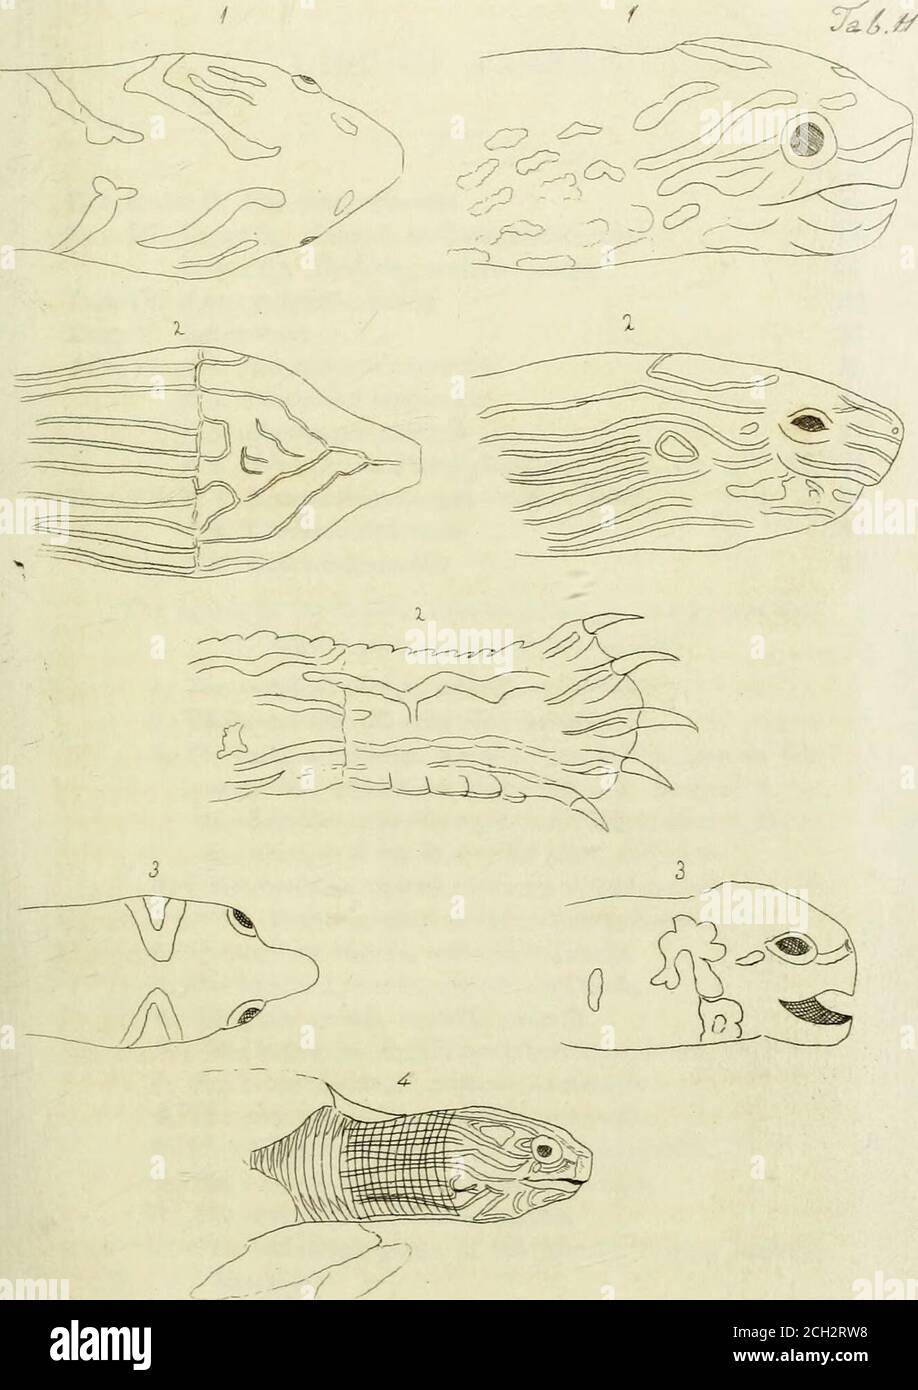 . Synopsis reptilium : or short descriptions of the species of reptiles. Part I., Cataphracta. Tortoises, crocodiles, and enaliosaurians . ca, byDr. Ruppell, which he thinks is distinct, and has named itCroc, octophractus. The beak is rather narrower than thecommon Egyptian specimens, it being 18|- inches long, andat the notch of the canines 3^, at the eyes 7, and at theocciput 10 inches wide, while in the Egyptian specimen ofnearly the same size, the head was ly inch longer, the samewidth at the notch, and 1 inch wider at the eyes and at theocciput. The former has 4 nuchal and 8 cervical plat Stock Photo